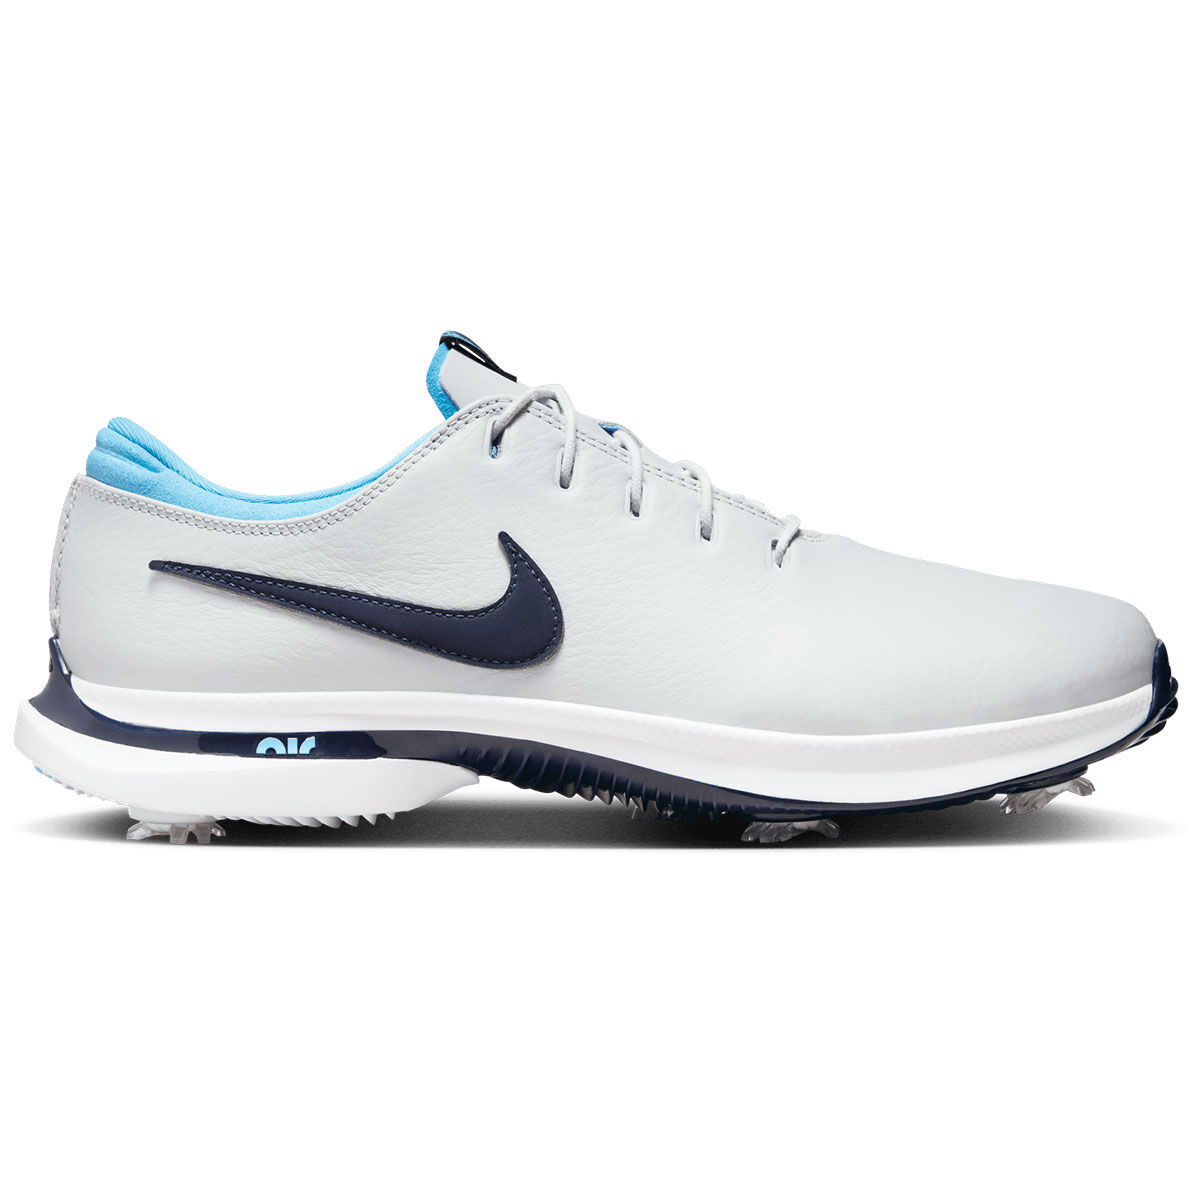 Nike Air Zoom Victory Tour 3 Waterproof Spiked Golf Shoes, Mens, Pure platinum/obsidian/white, 11 | American Golf